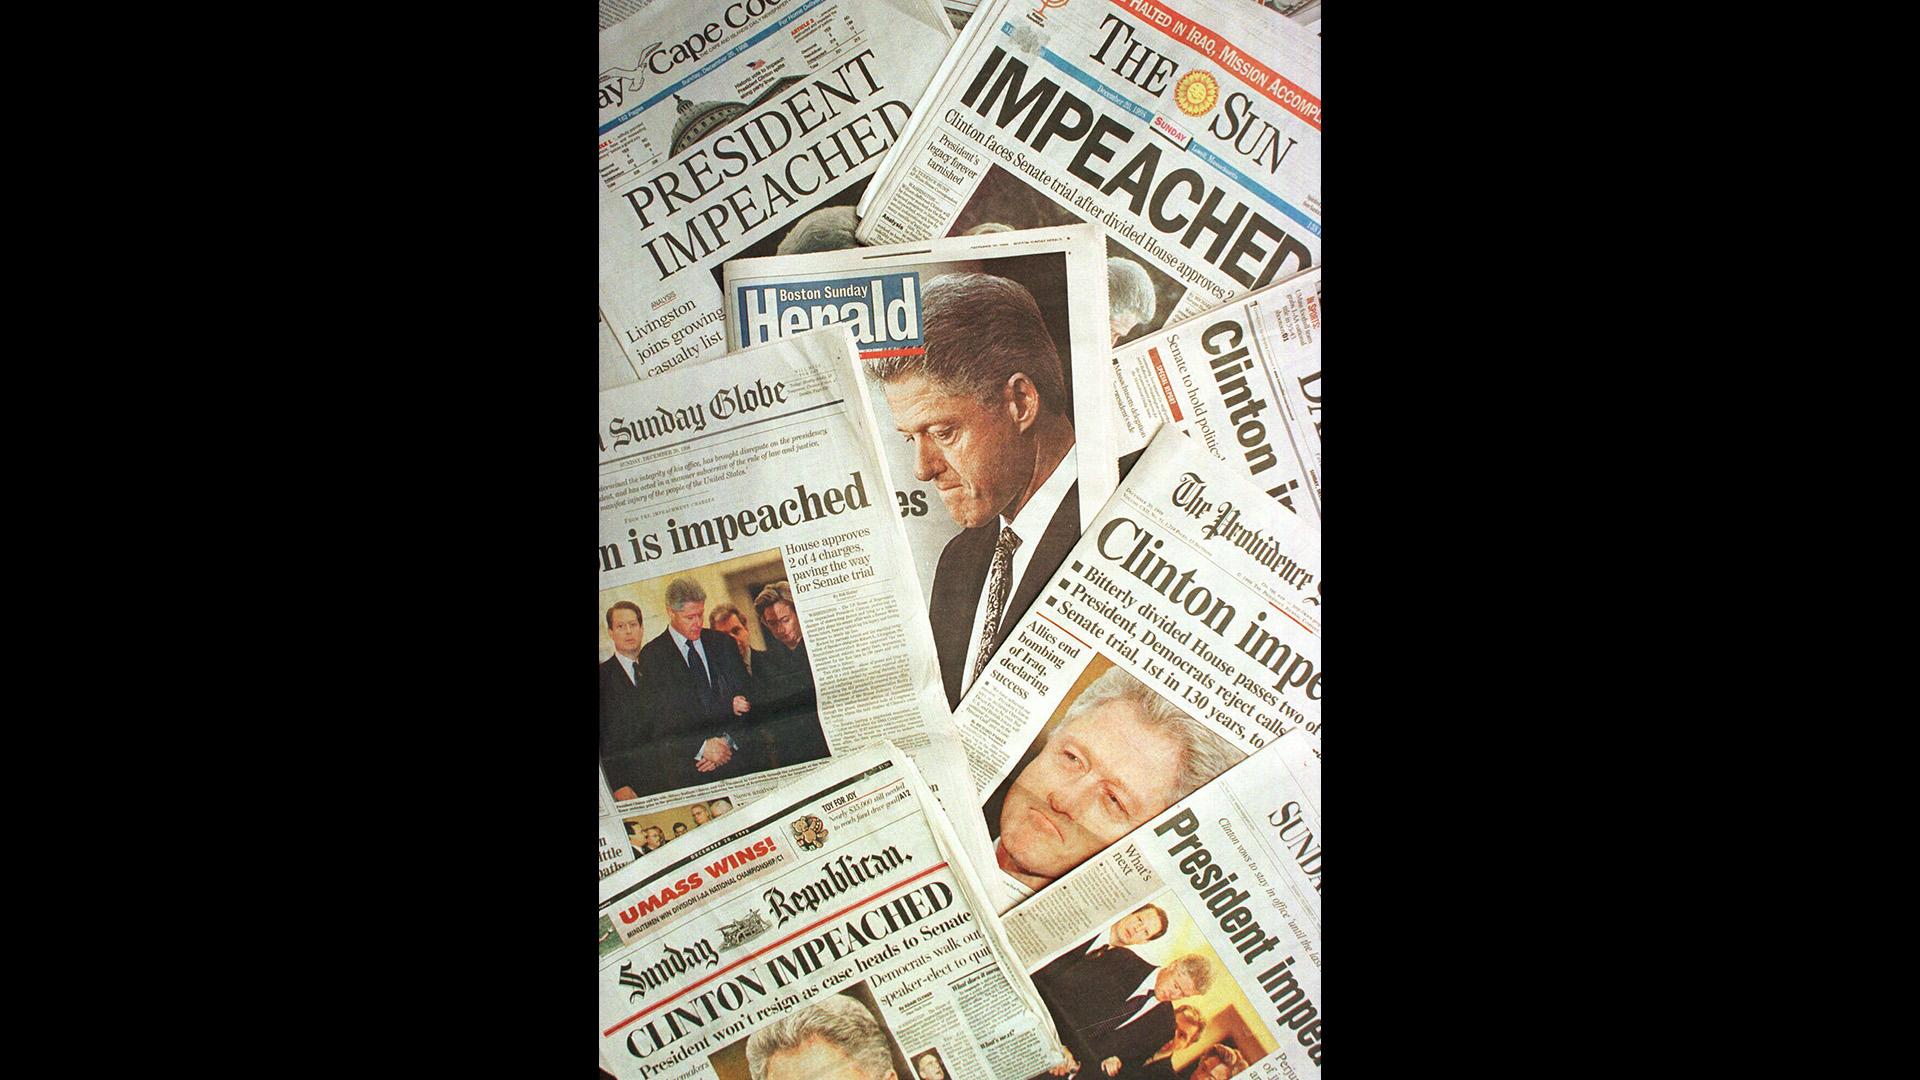 This is a photo montage showing the Sunday, Dec. 20, 1998 editions of newspapers from Massachusetts and Rhode Island with headlines of President Clinton’s impeachment. The newpapers shown are: The Patriot Ledger, The Sun, Cape Cod Times, Boston Herald, The Boston Globe, The Metrowest Daily News, Sunday Republican, The Providence Journal and Sunday Telegram. (AP Photo / Peter Lennihan)